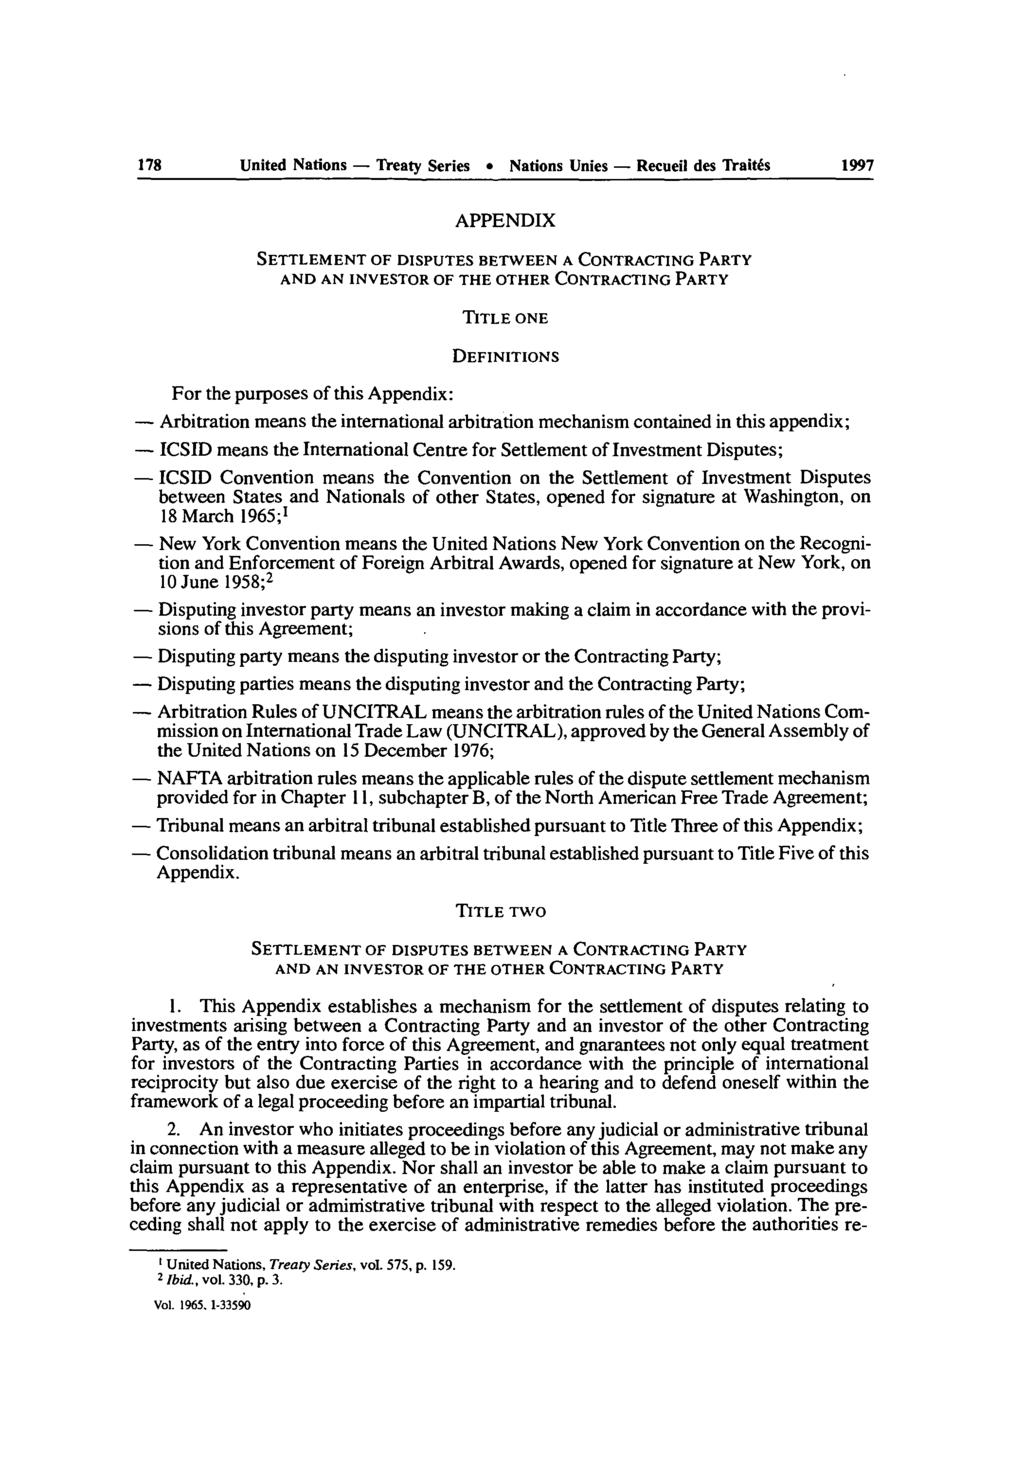 178 United Nations - Treaty Series Nations Unies - Recueil des Traites 1997 APPENDIX SETTLEMENT OF DISPUTES BETWEEN A CONTRACTING PARTY AND AN INVESTOR OF THE OTHER CONTRACTING PARTY TITLE ONE